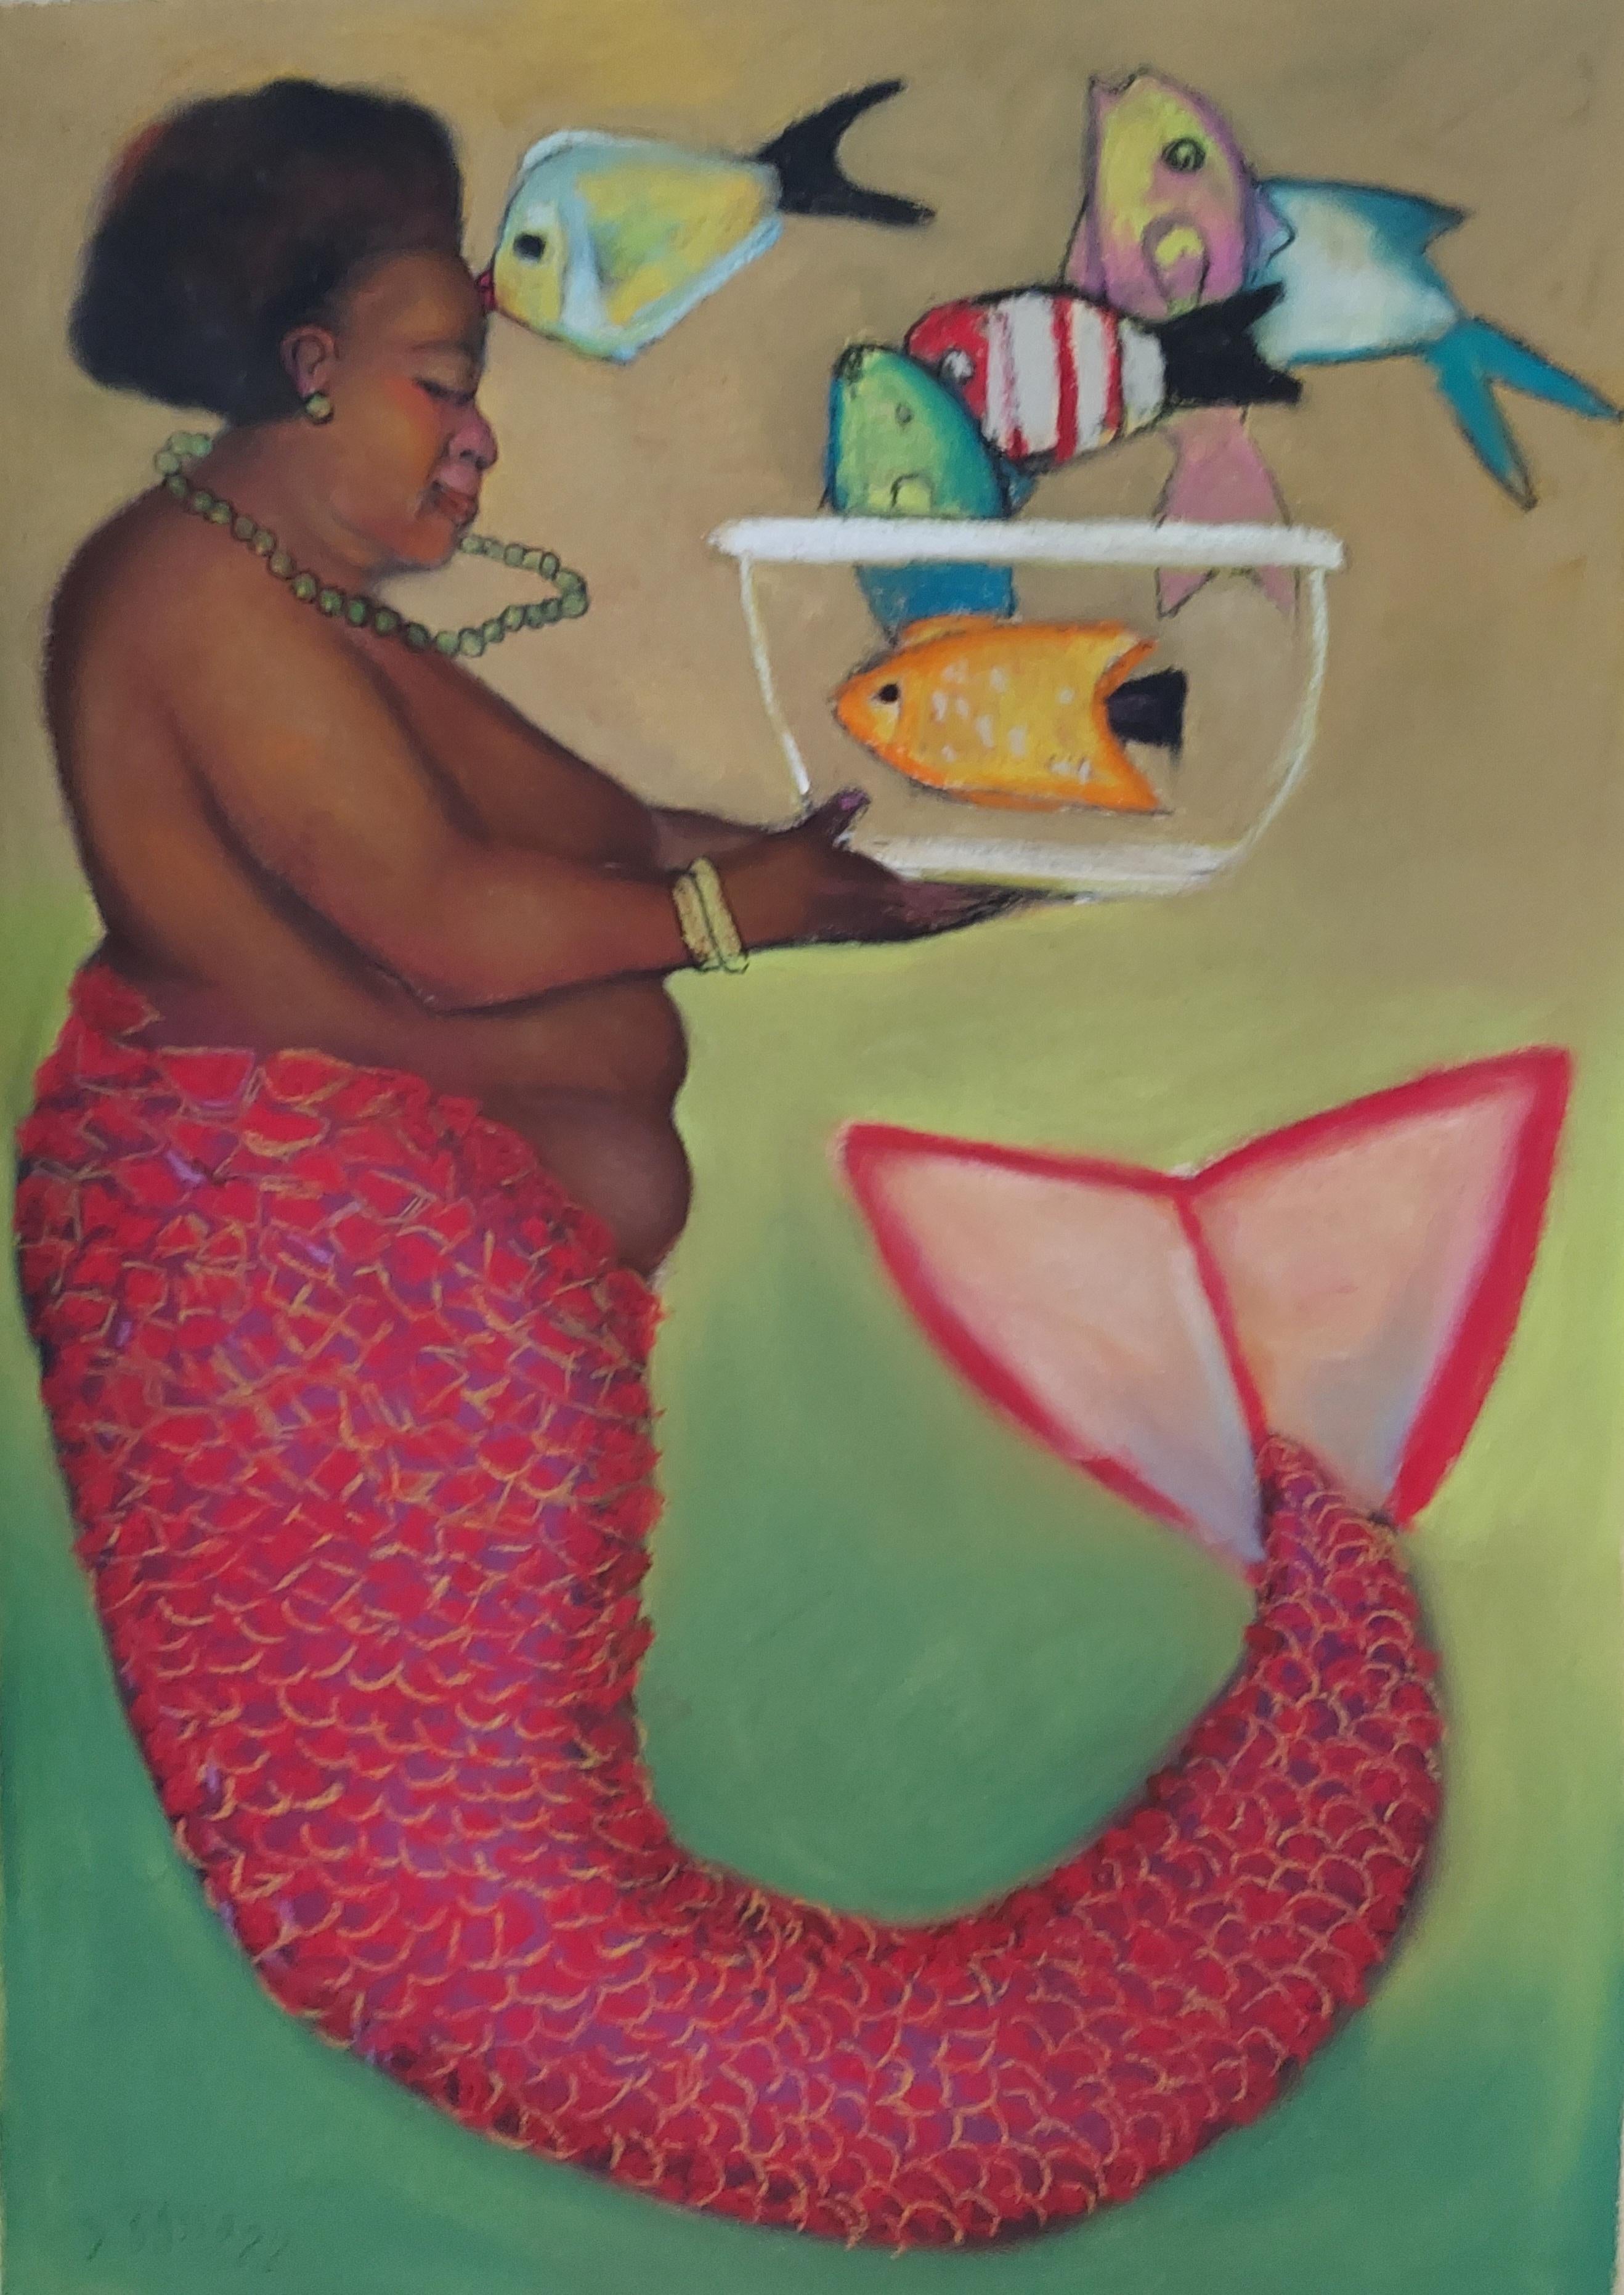 Stephen Basso Figurative Art - Caribbean Mermaid  soft tropical color Mermaid and angel fish mythical subject